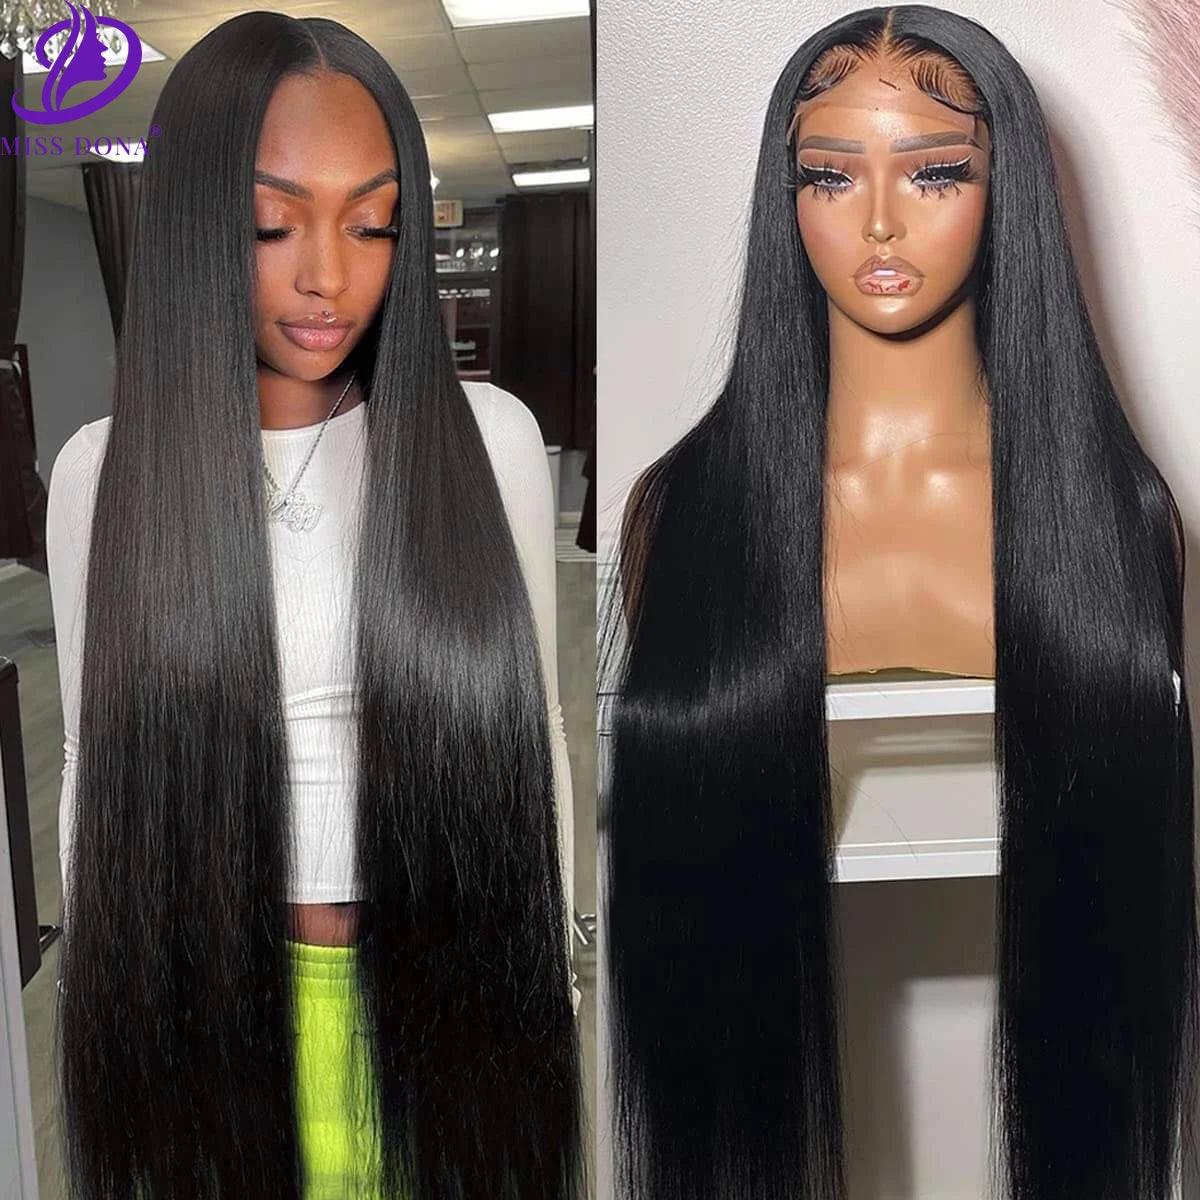 250 Density 40-48" Transparent Lace Front Remy Human Hair Wig - Straight Style  ourlum.com 360 Lace Wig 26 inches 200 Density